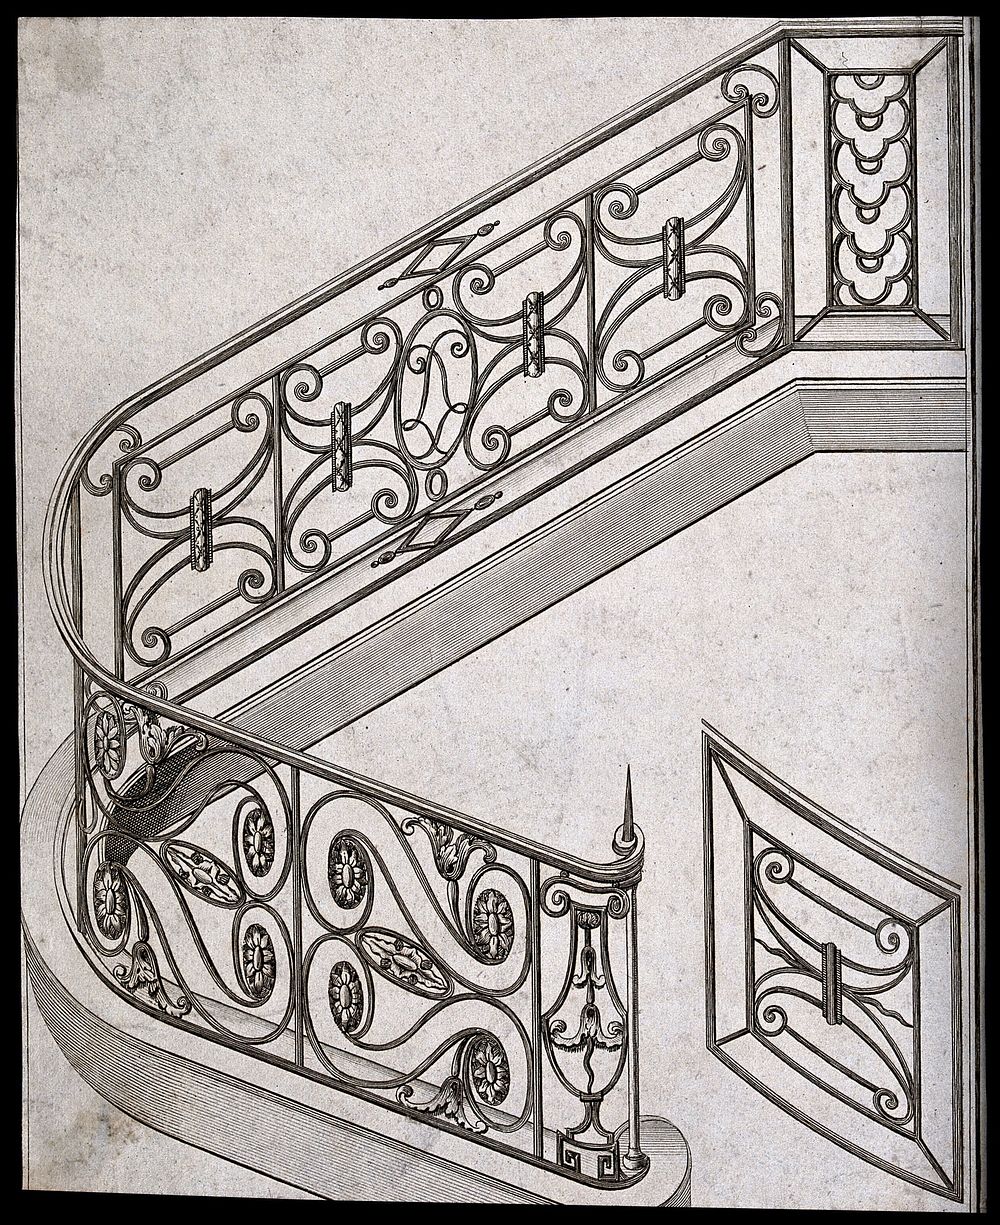 Architecture: designs for stair balustrades. Etching.